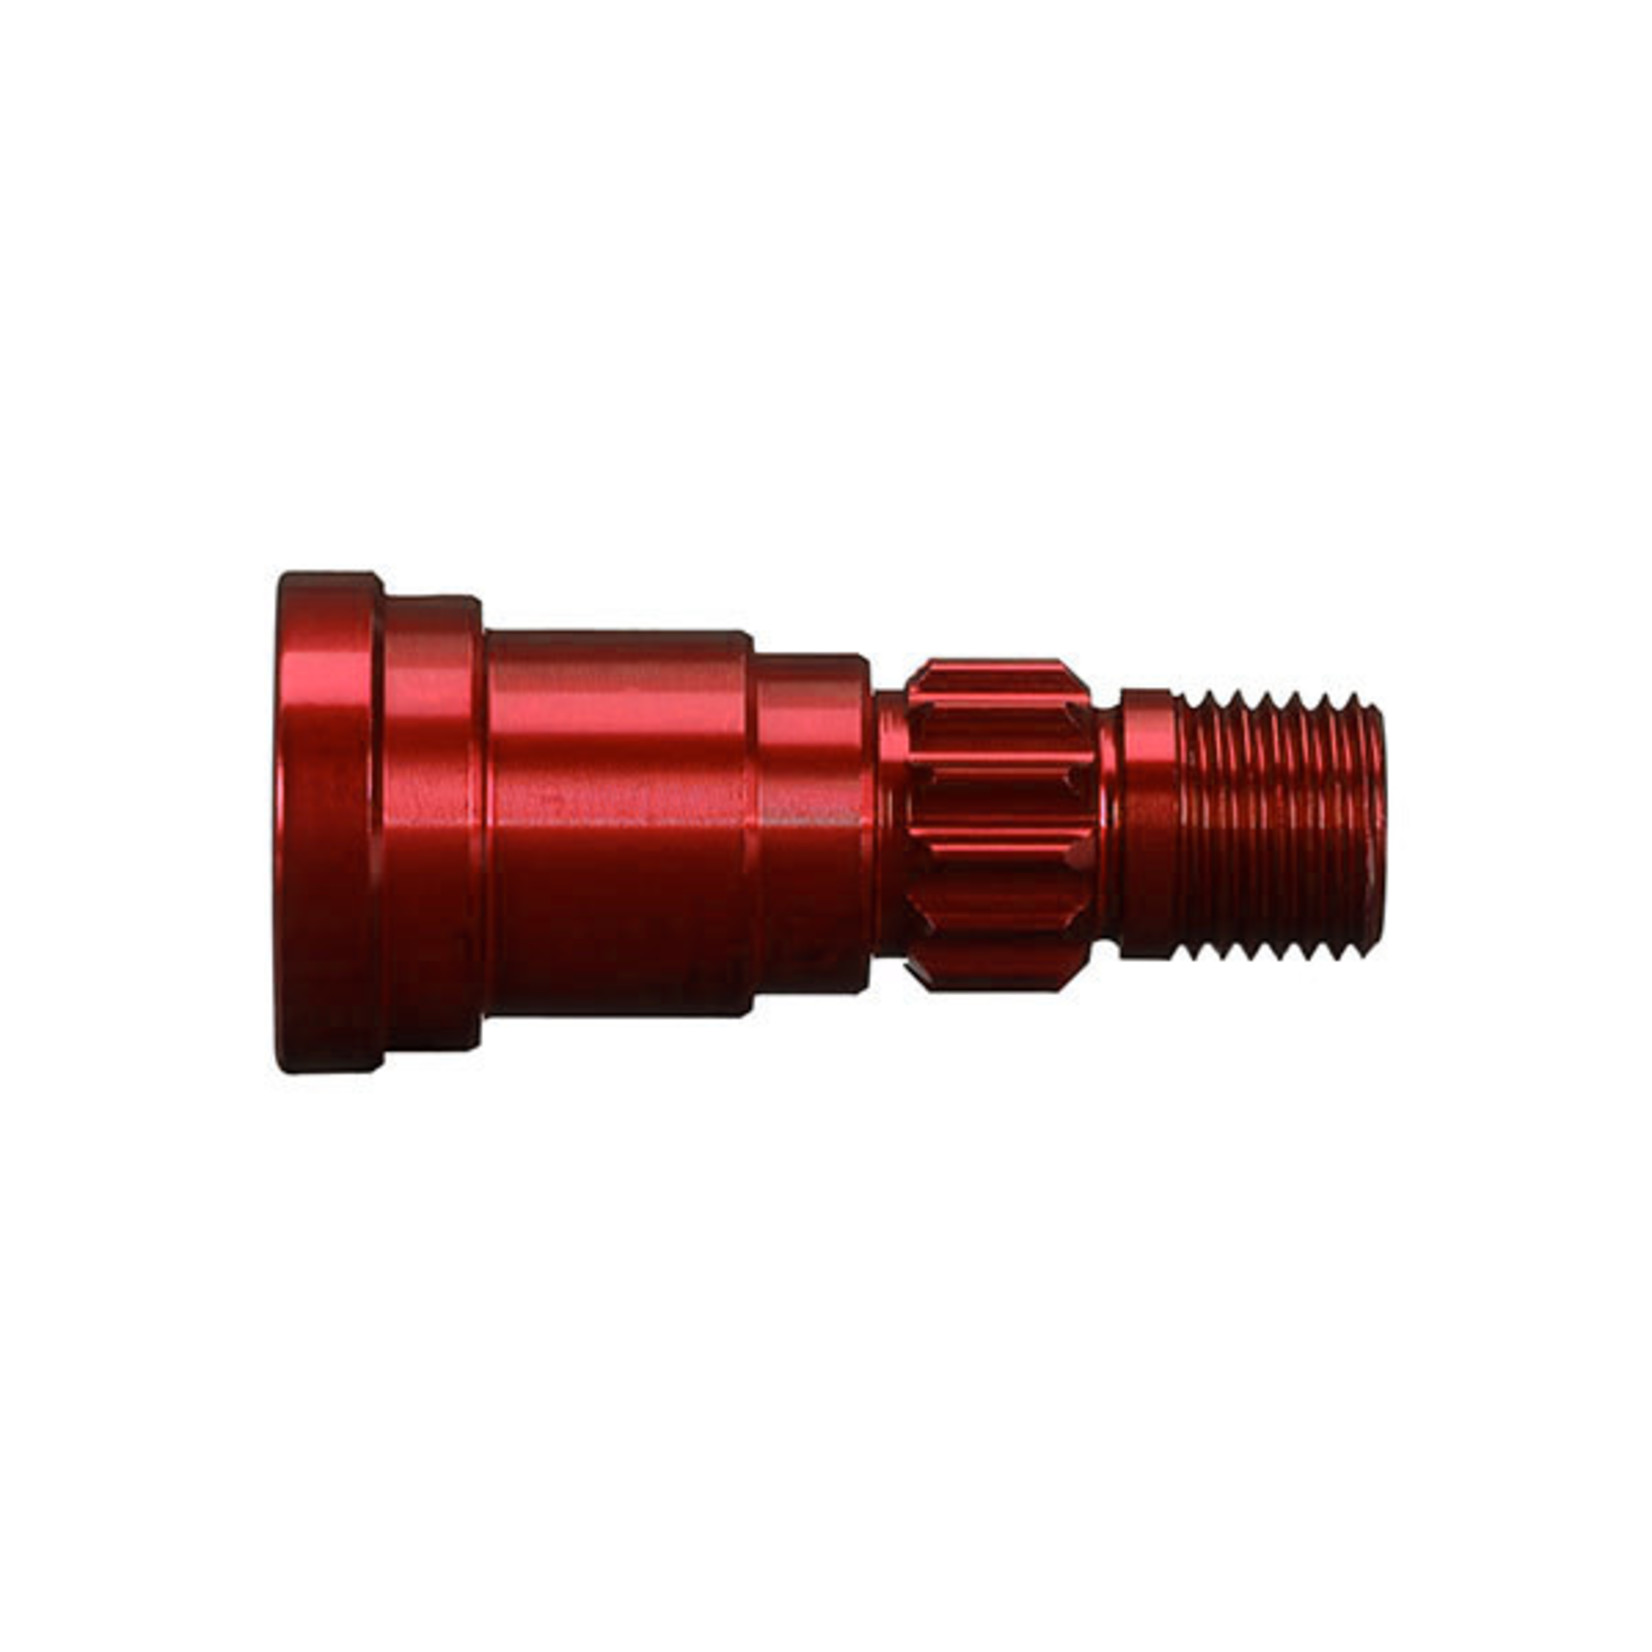 TRAXXAS Stub axle, aluminum (red-anodized) (1) (for use only with #7750X driveshaft)